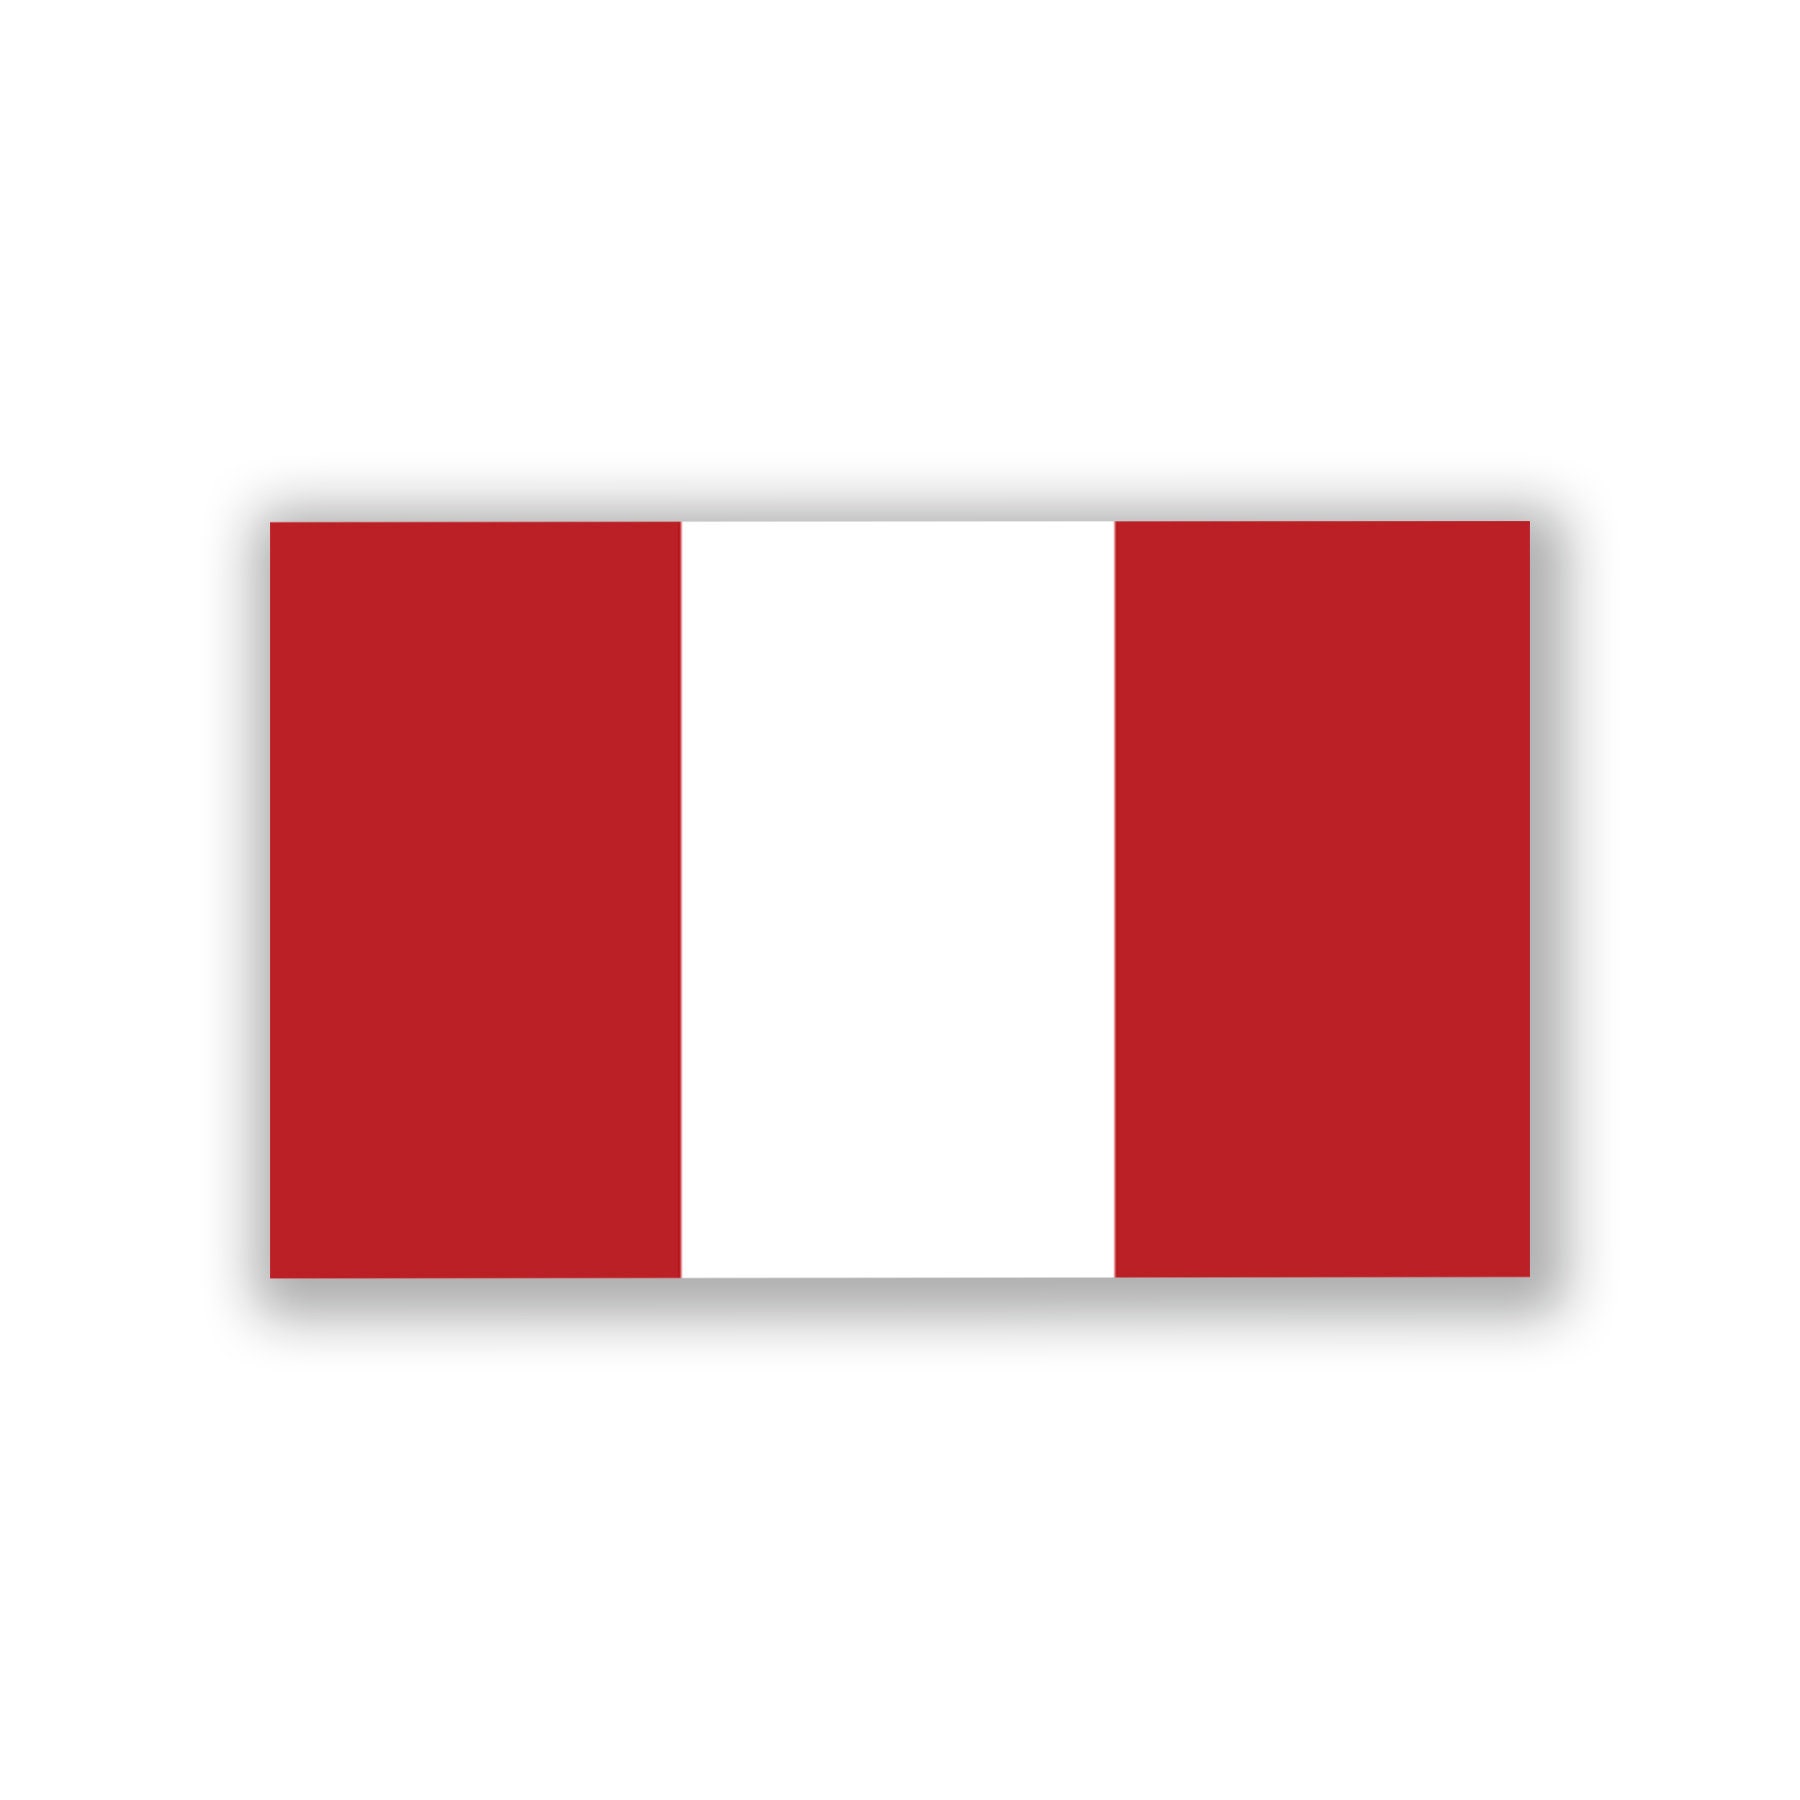 Peru Flag Decal Sticker 5-inches by 3-inches Premium Quality Vinyl